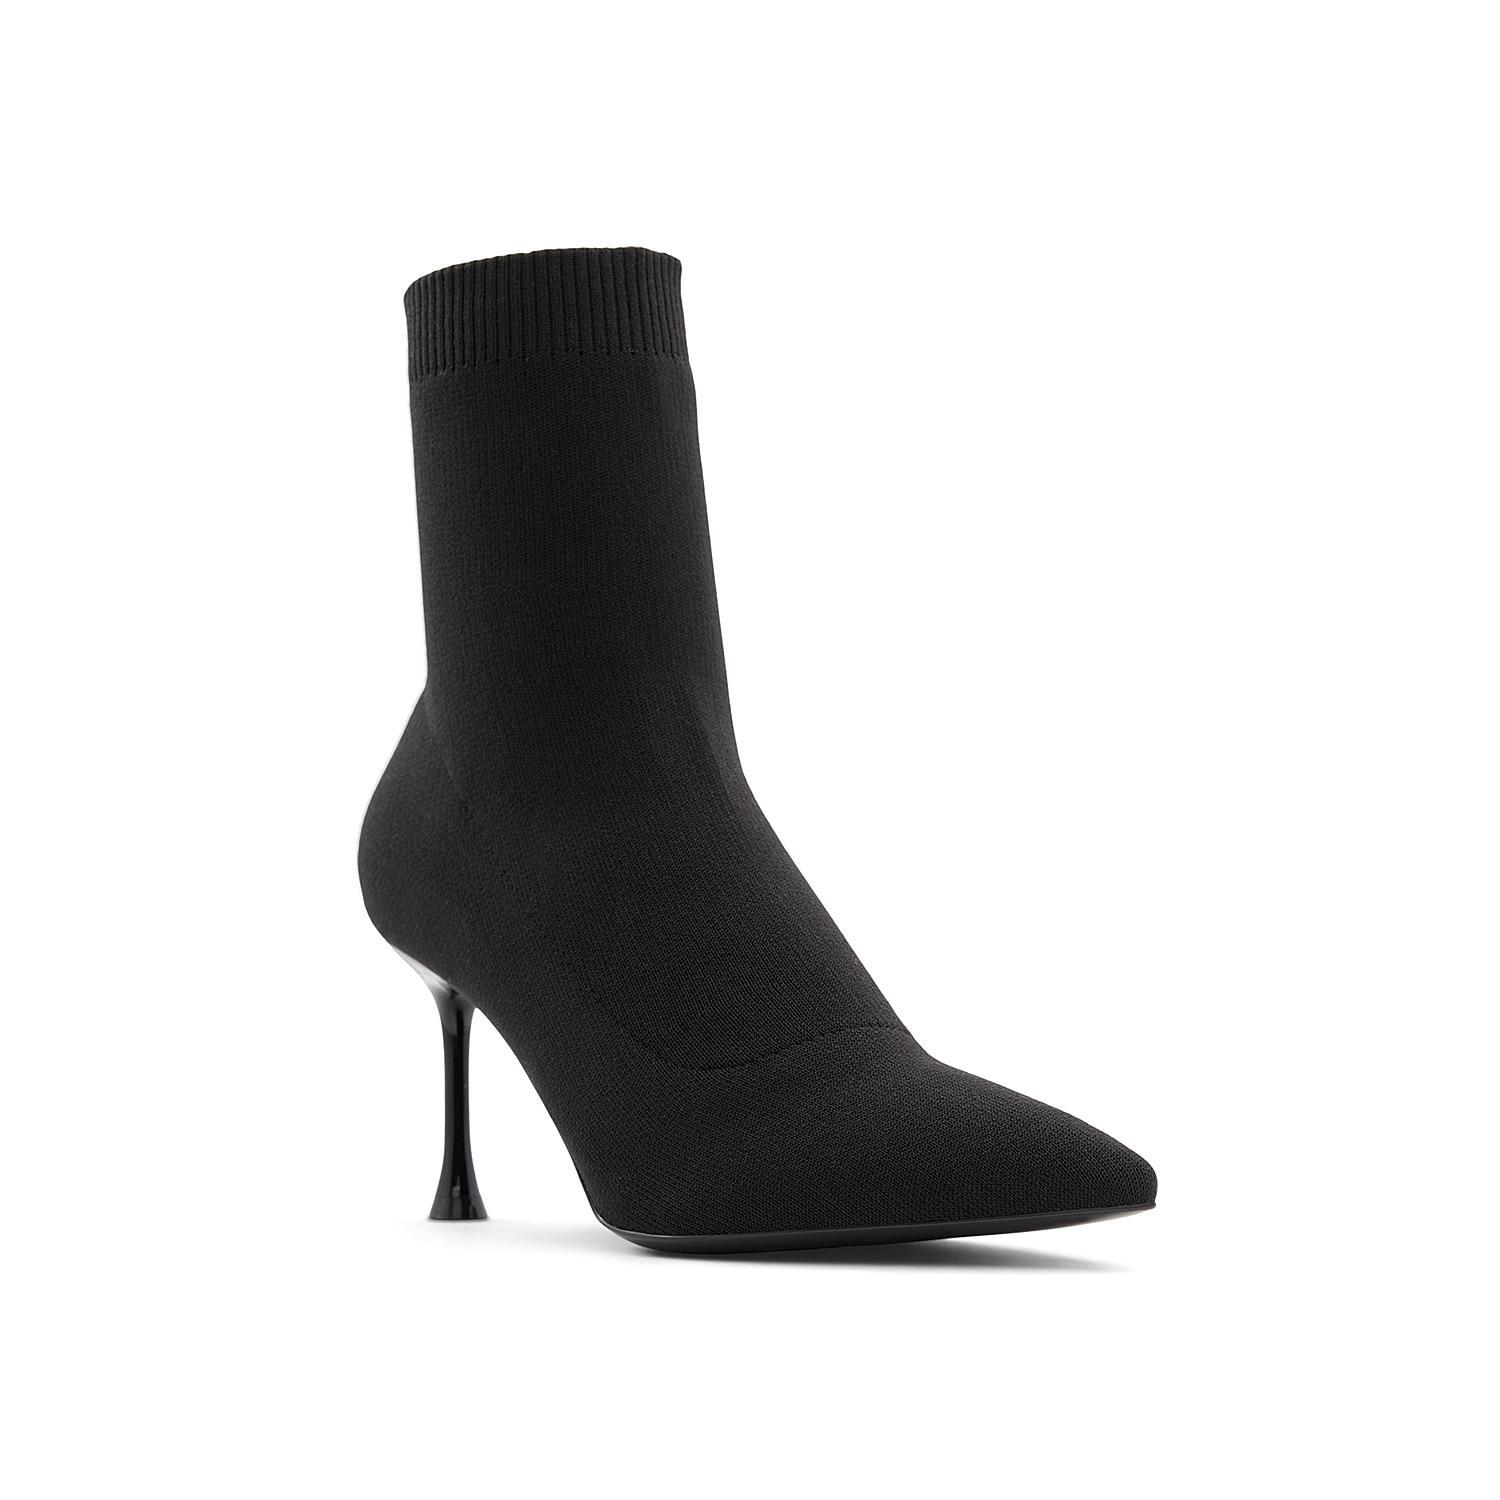 ALDO Phara Pointed Toe Sock Bootie Product Image